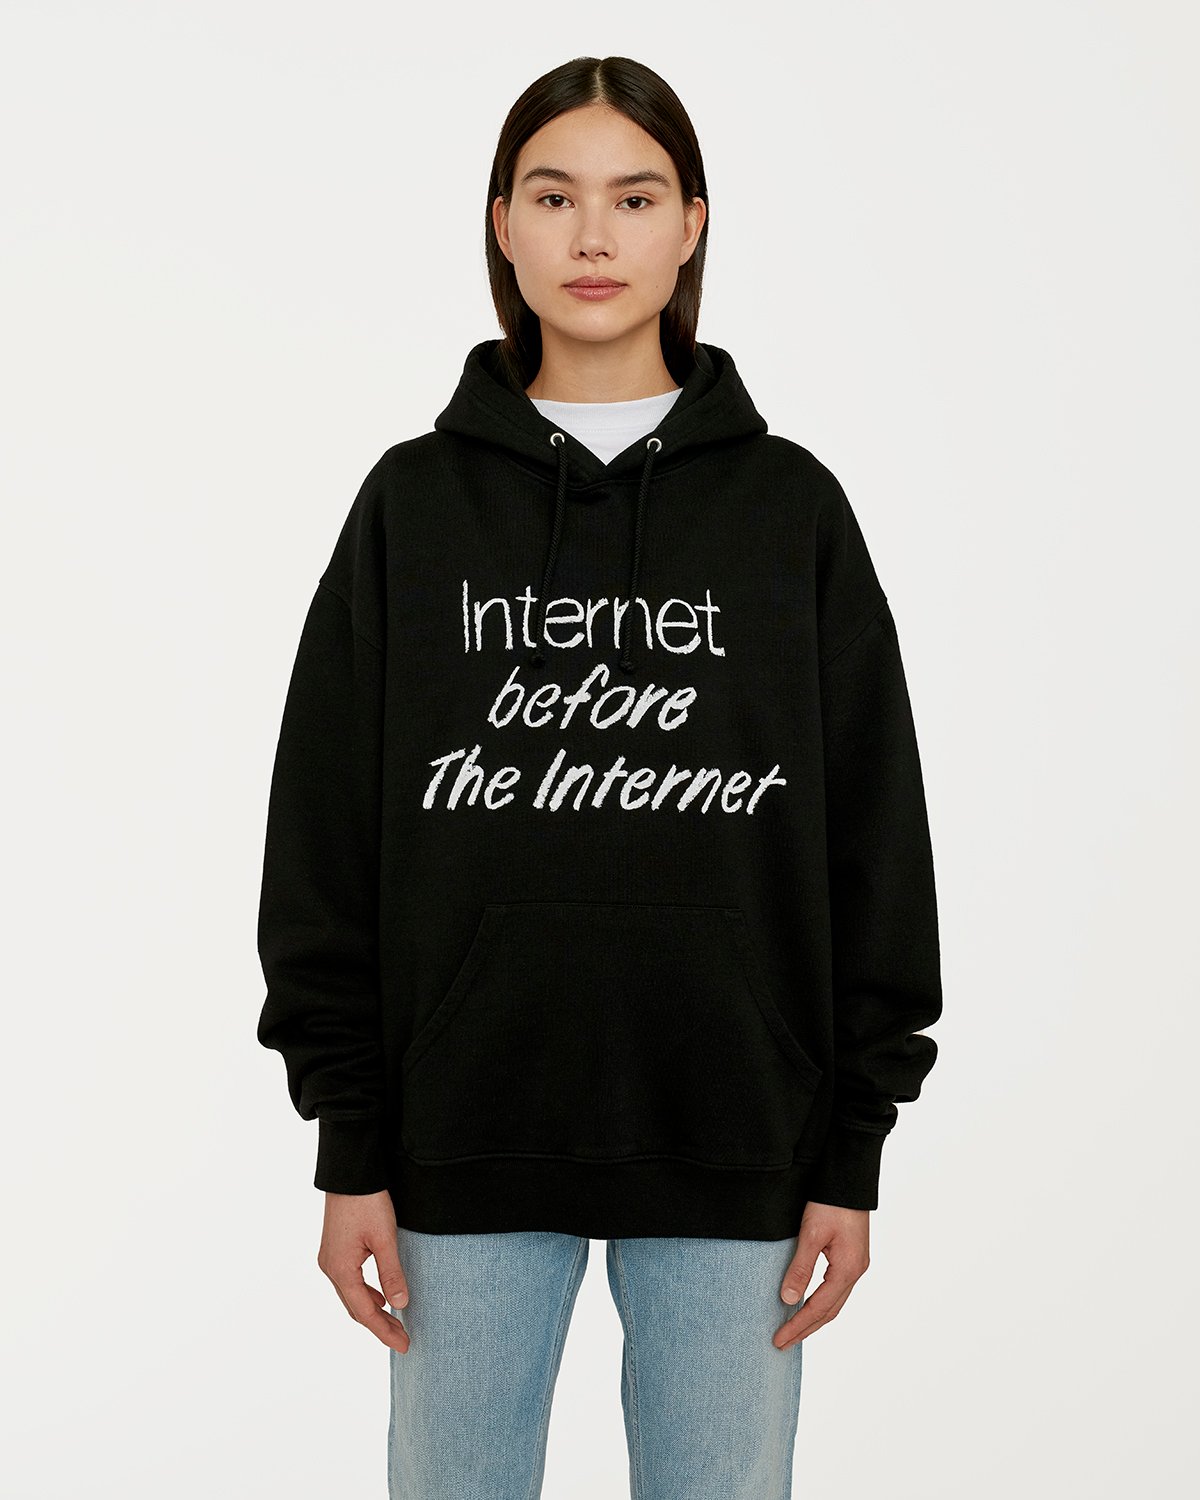 Colette Mon Amour - The Internet Before The Internet Hoodie Black - Clothing - Black - Image 4